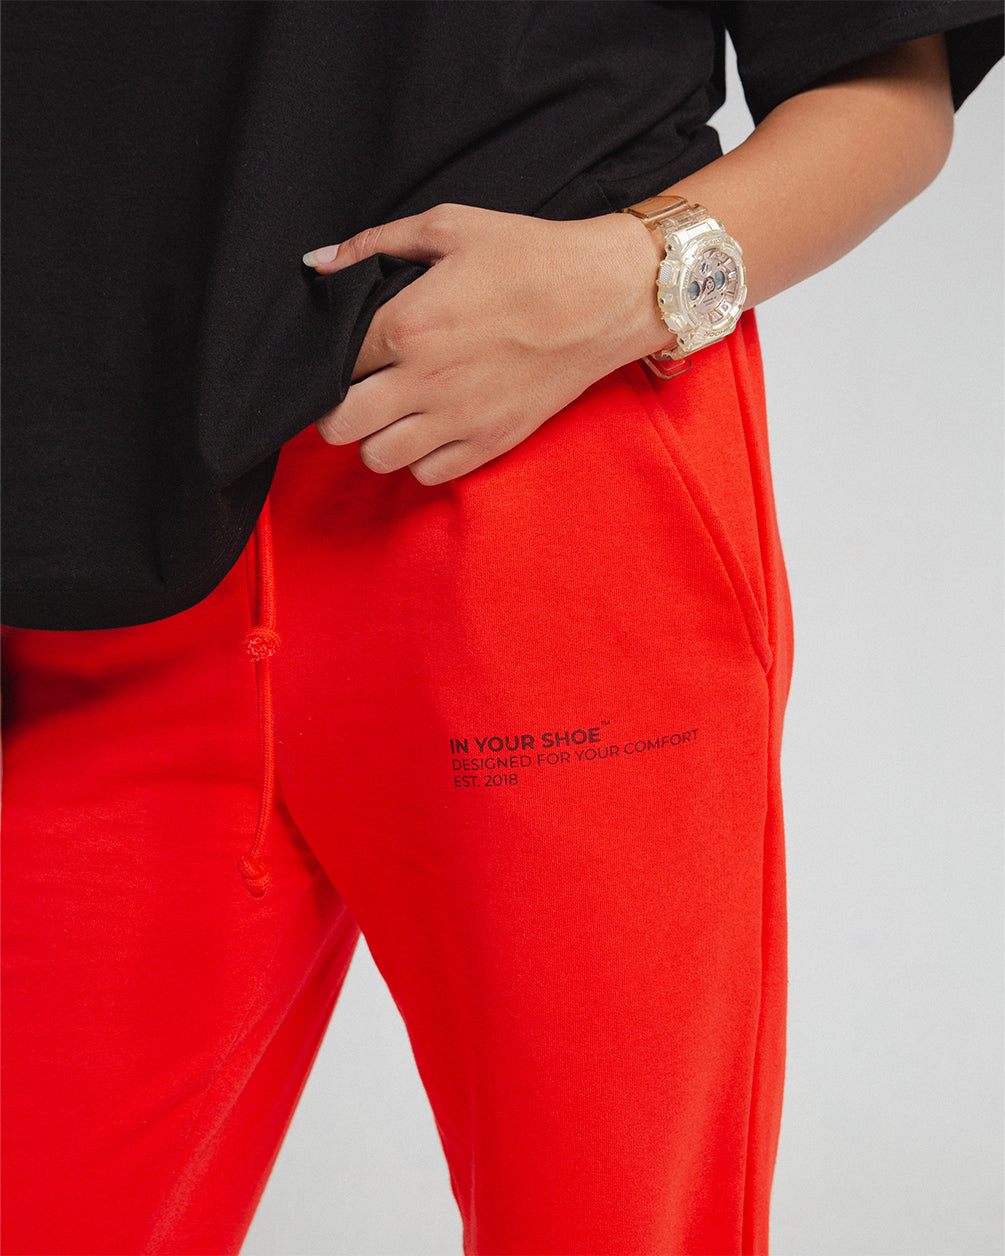 Red Swants (Sweatpants)